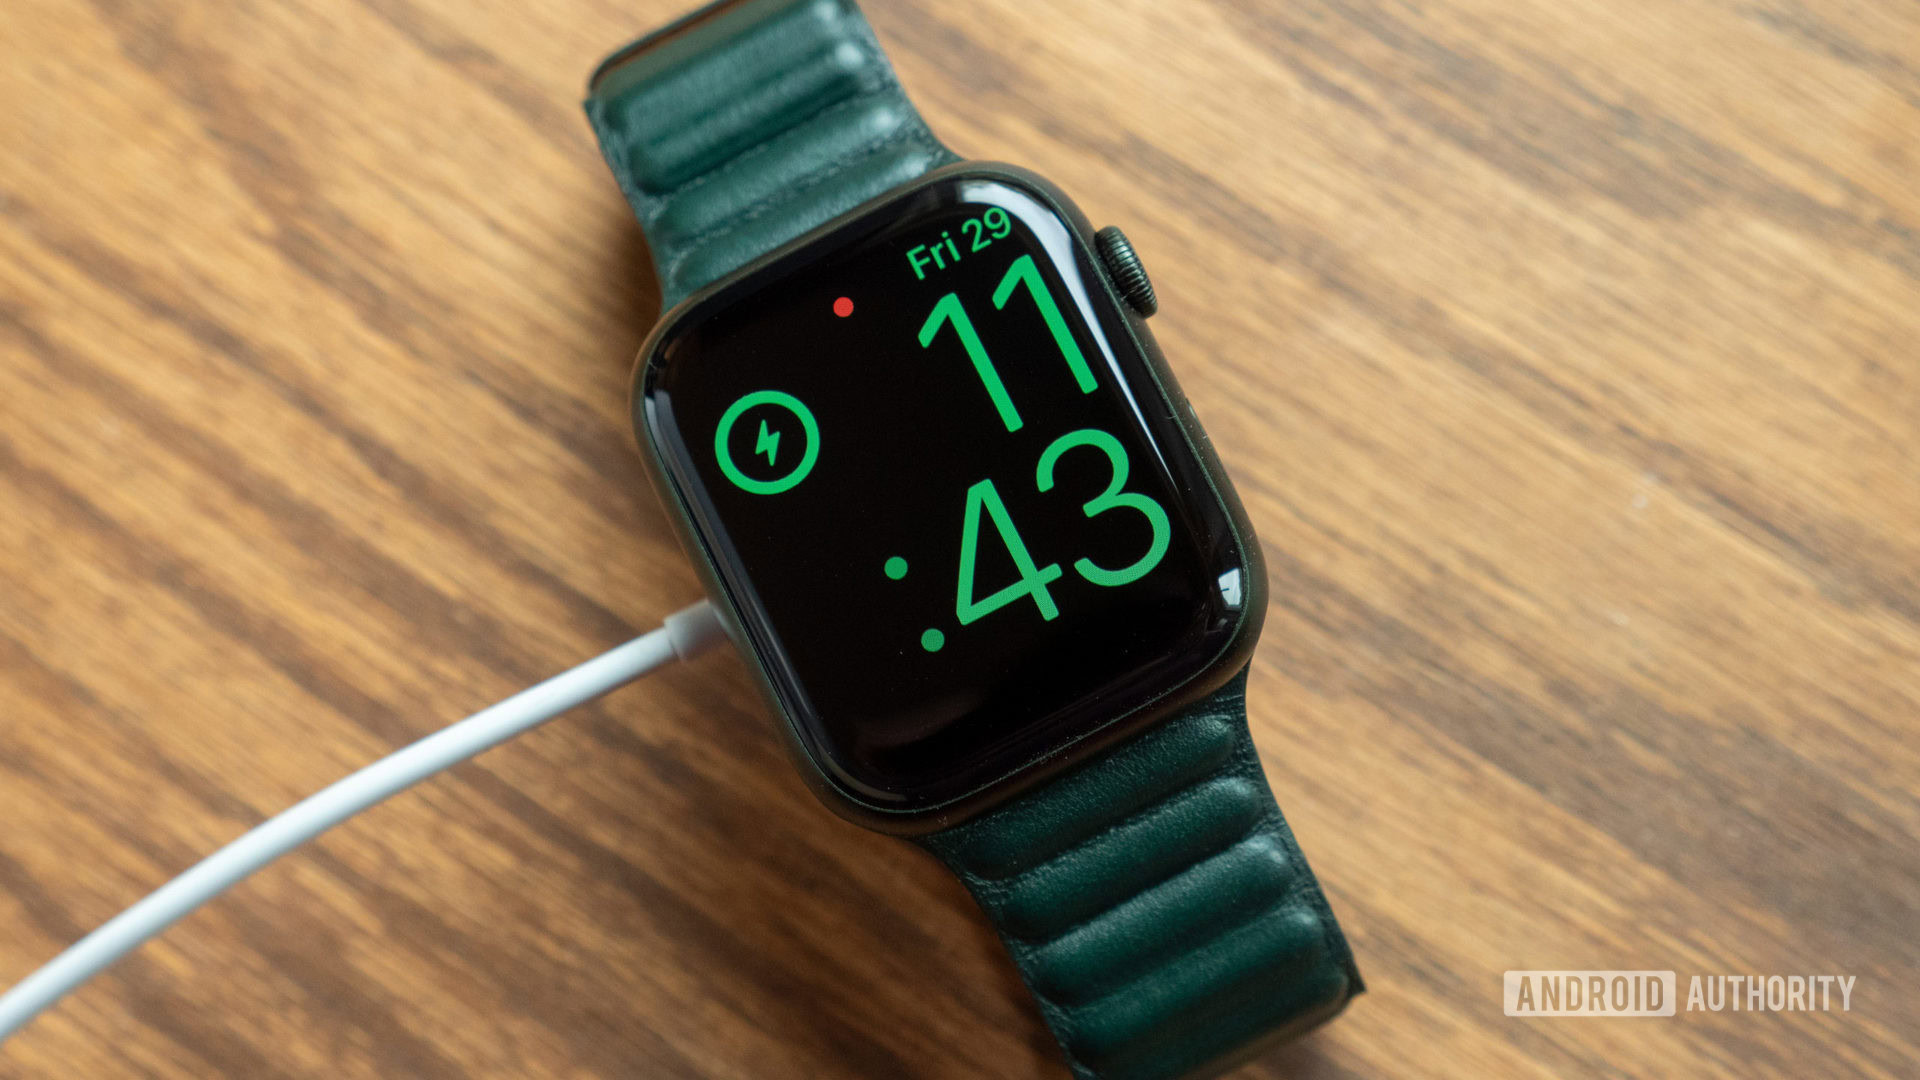 The Apple Watch Series 7 upgraded my life in so many ways